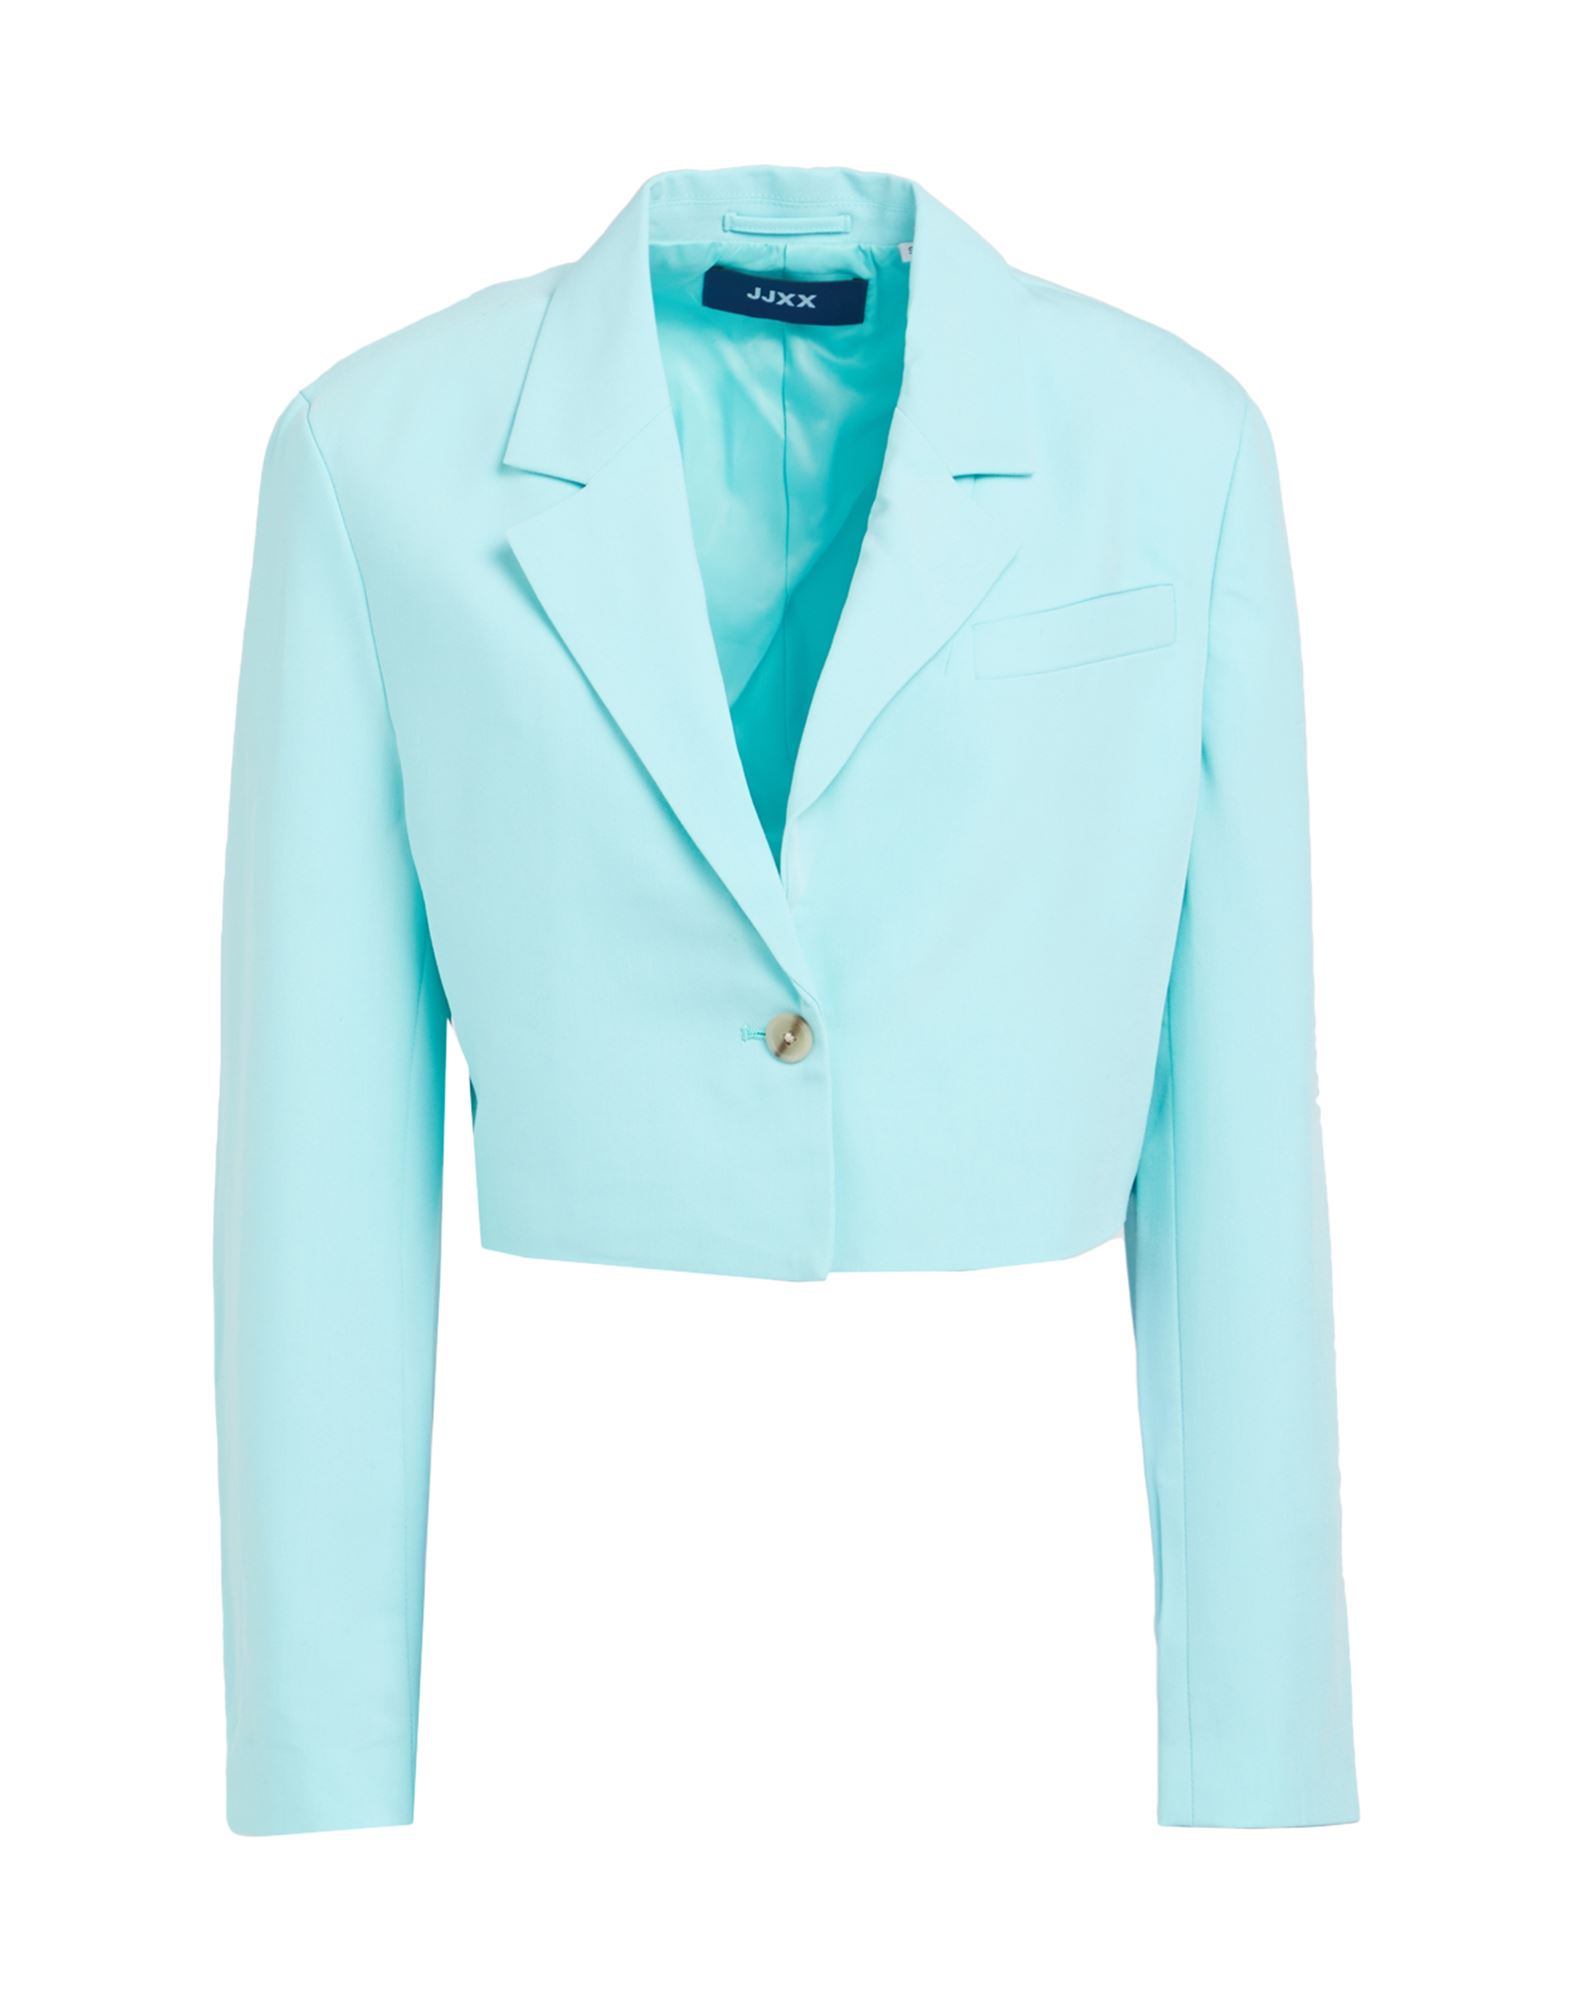 Jjxx By Jack & Jones Woman Blazer Turquoise Size L Recycled Polyester, Viscose, Elastane In Blue